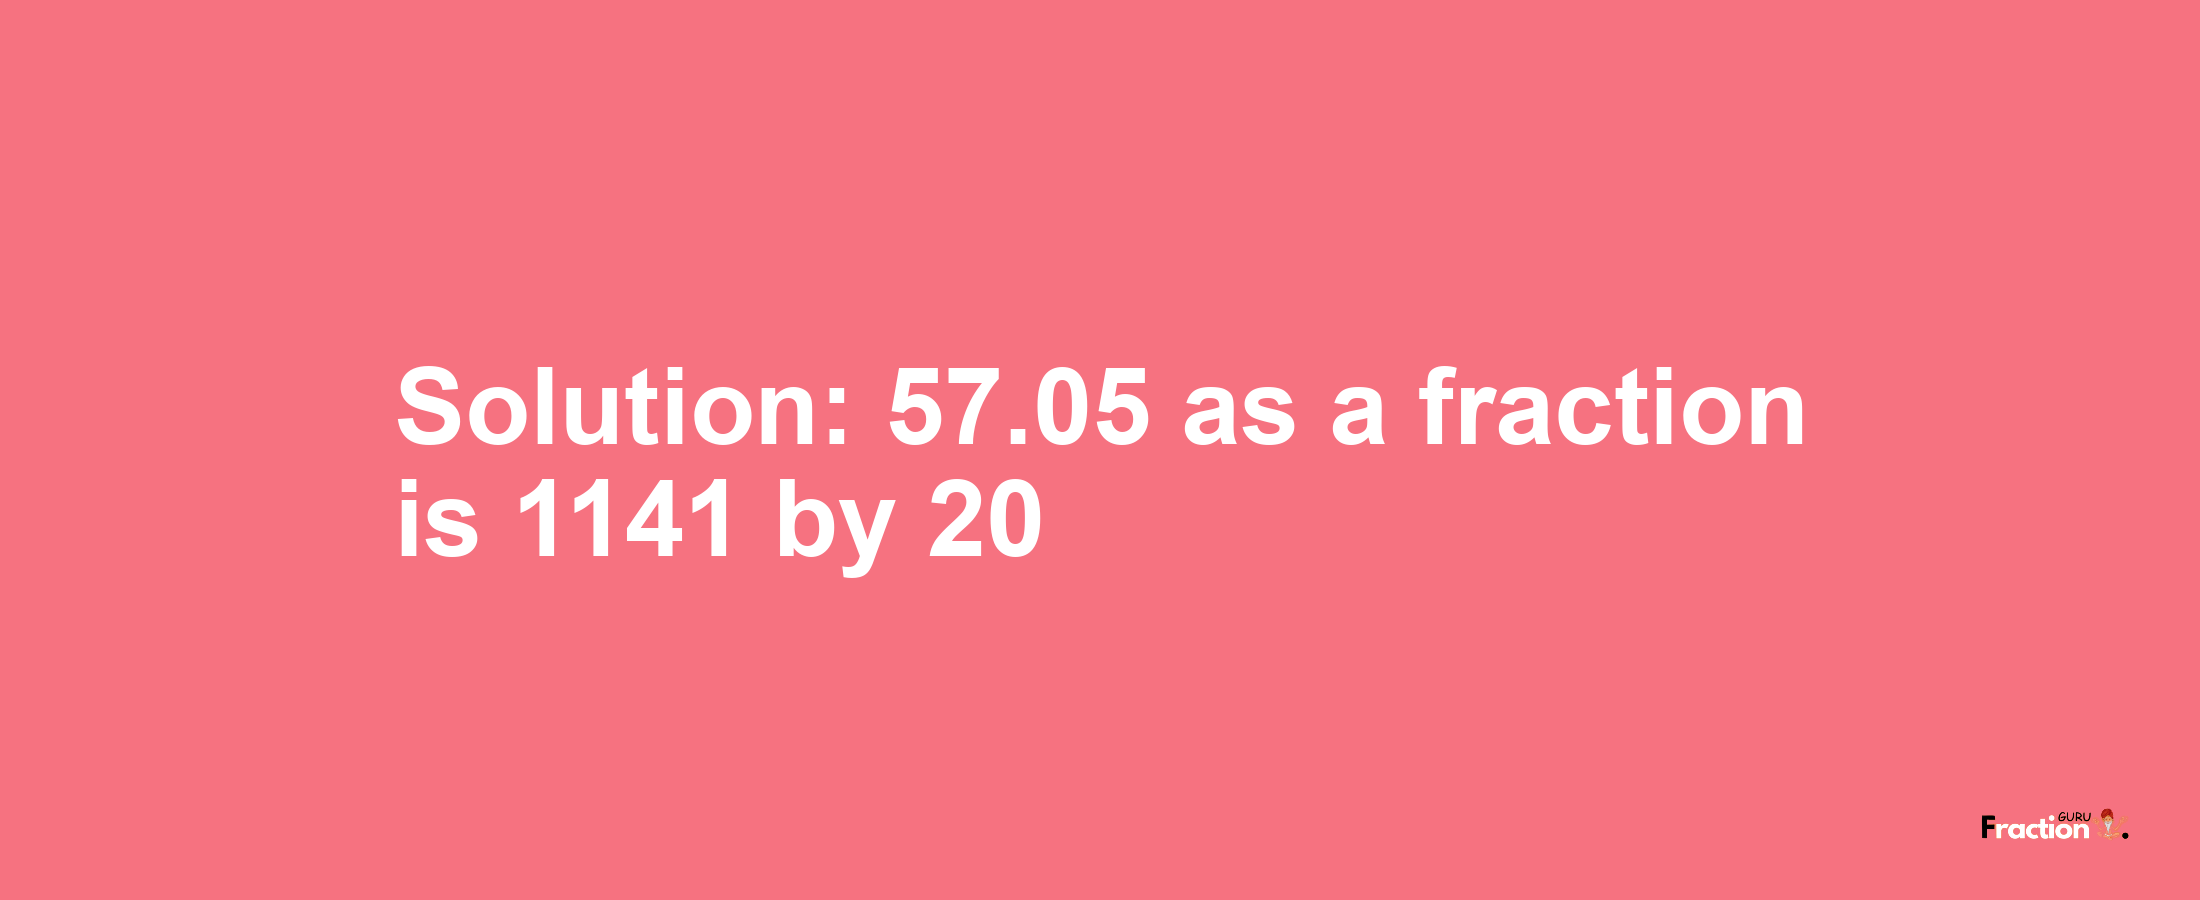 Solution:57.05 as a fraction is 1141/20